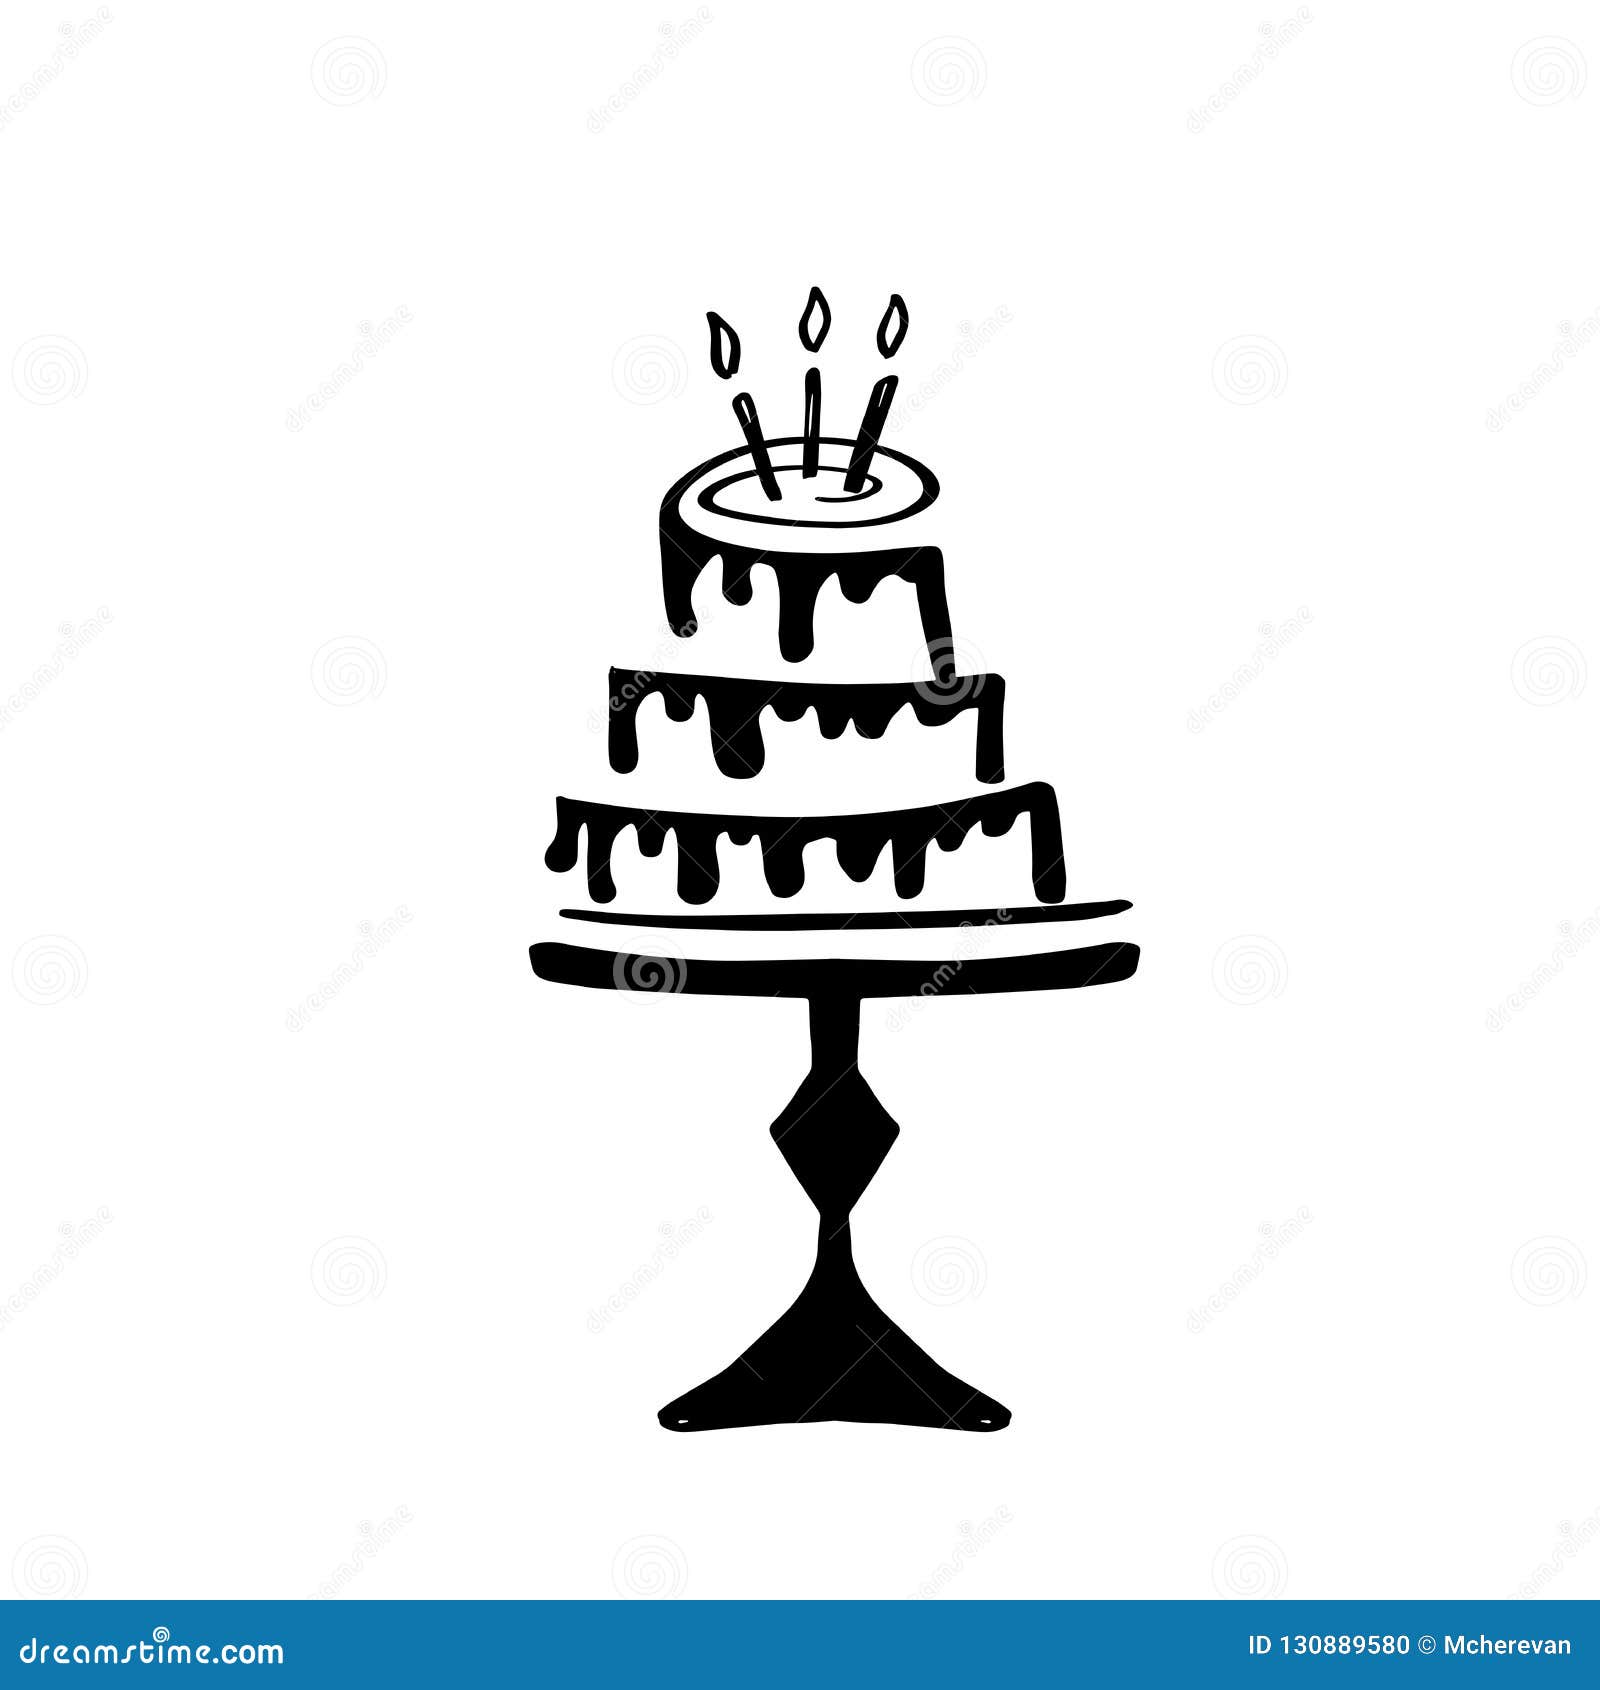 Hand Drawn Doodle Birthday Cake With Caldles Vector Icon Logo Or